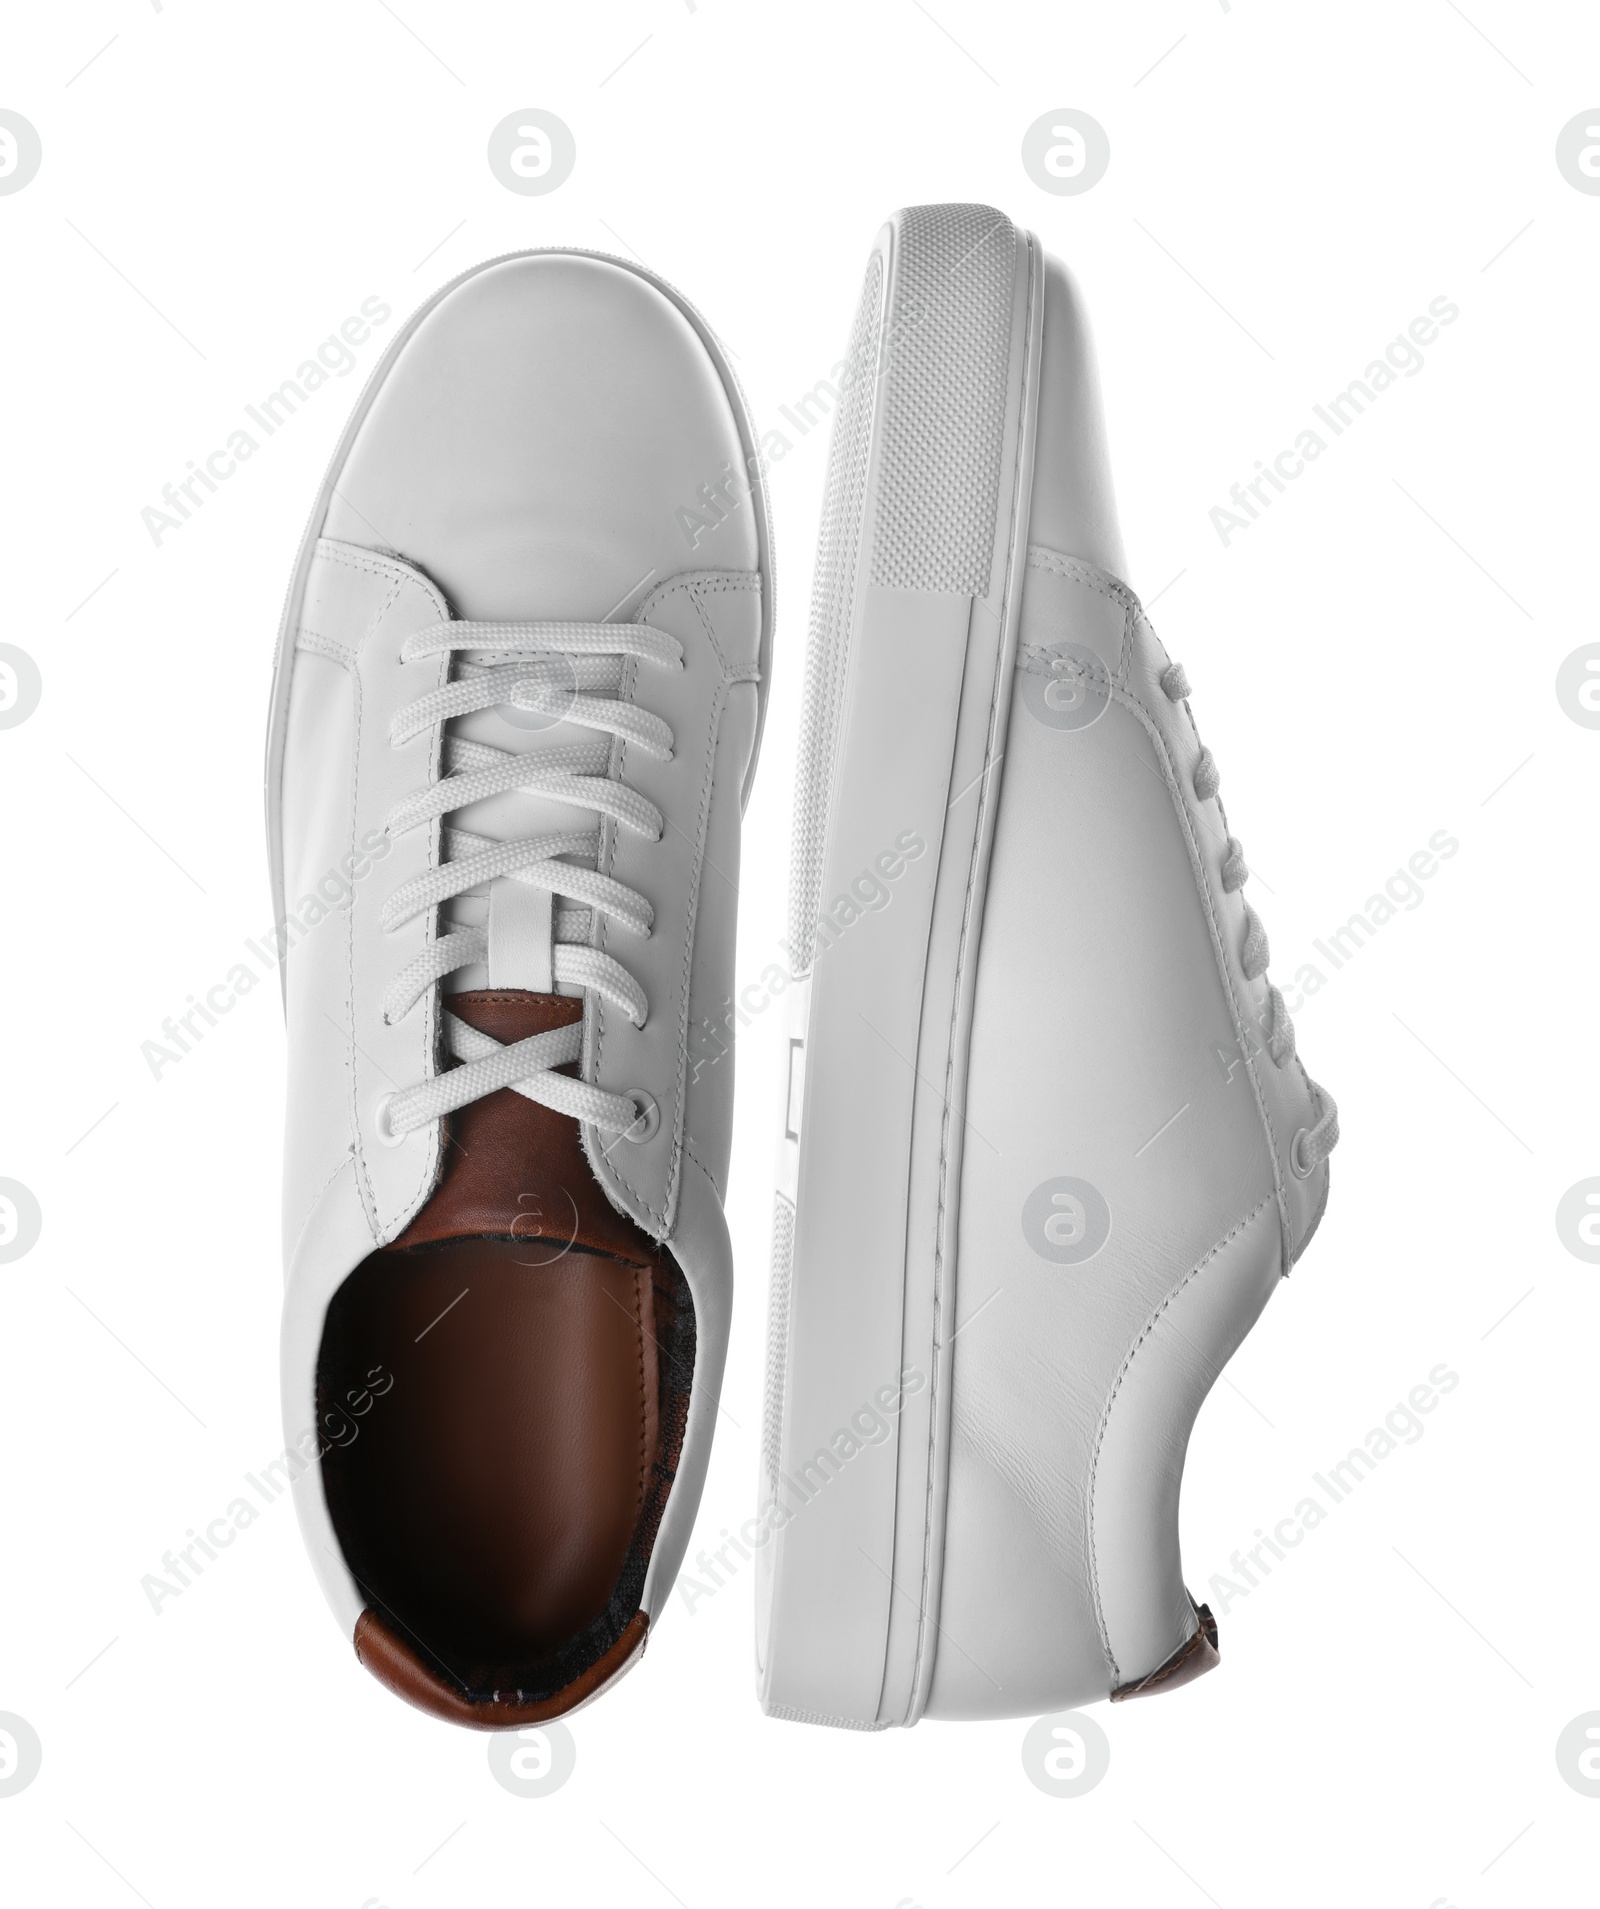 Photo of Pair of stylish sports shoes on white background, top view